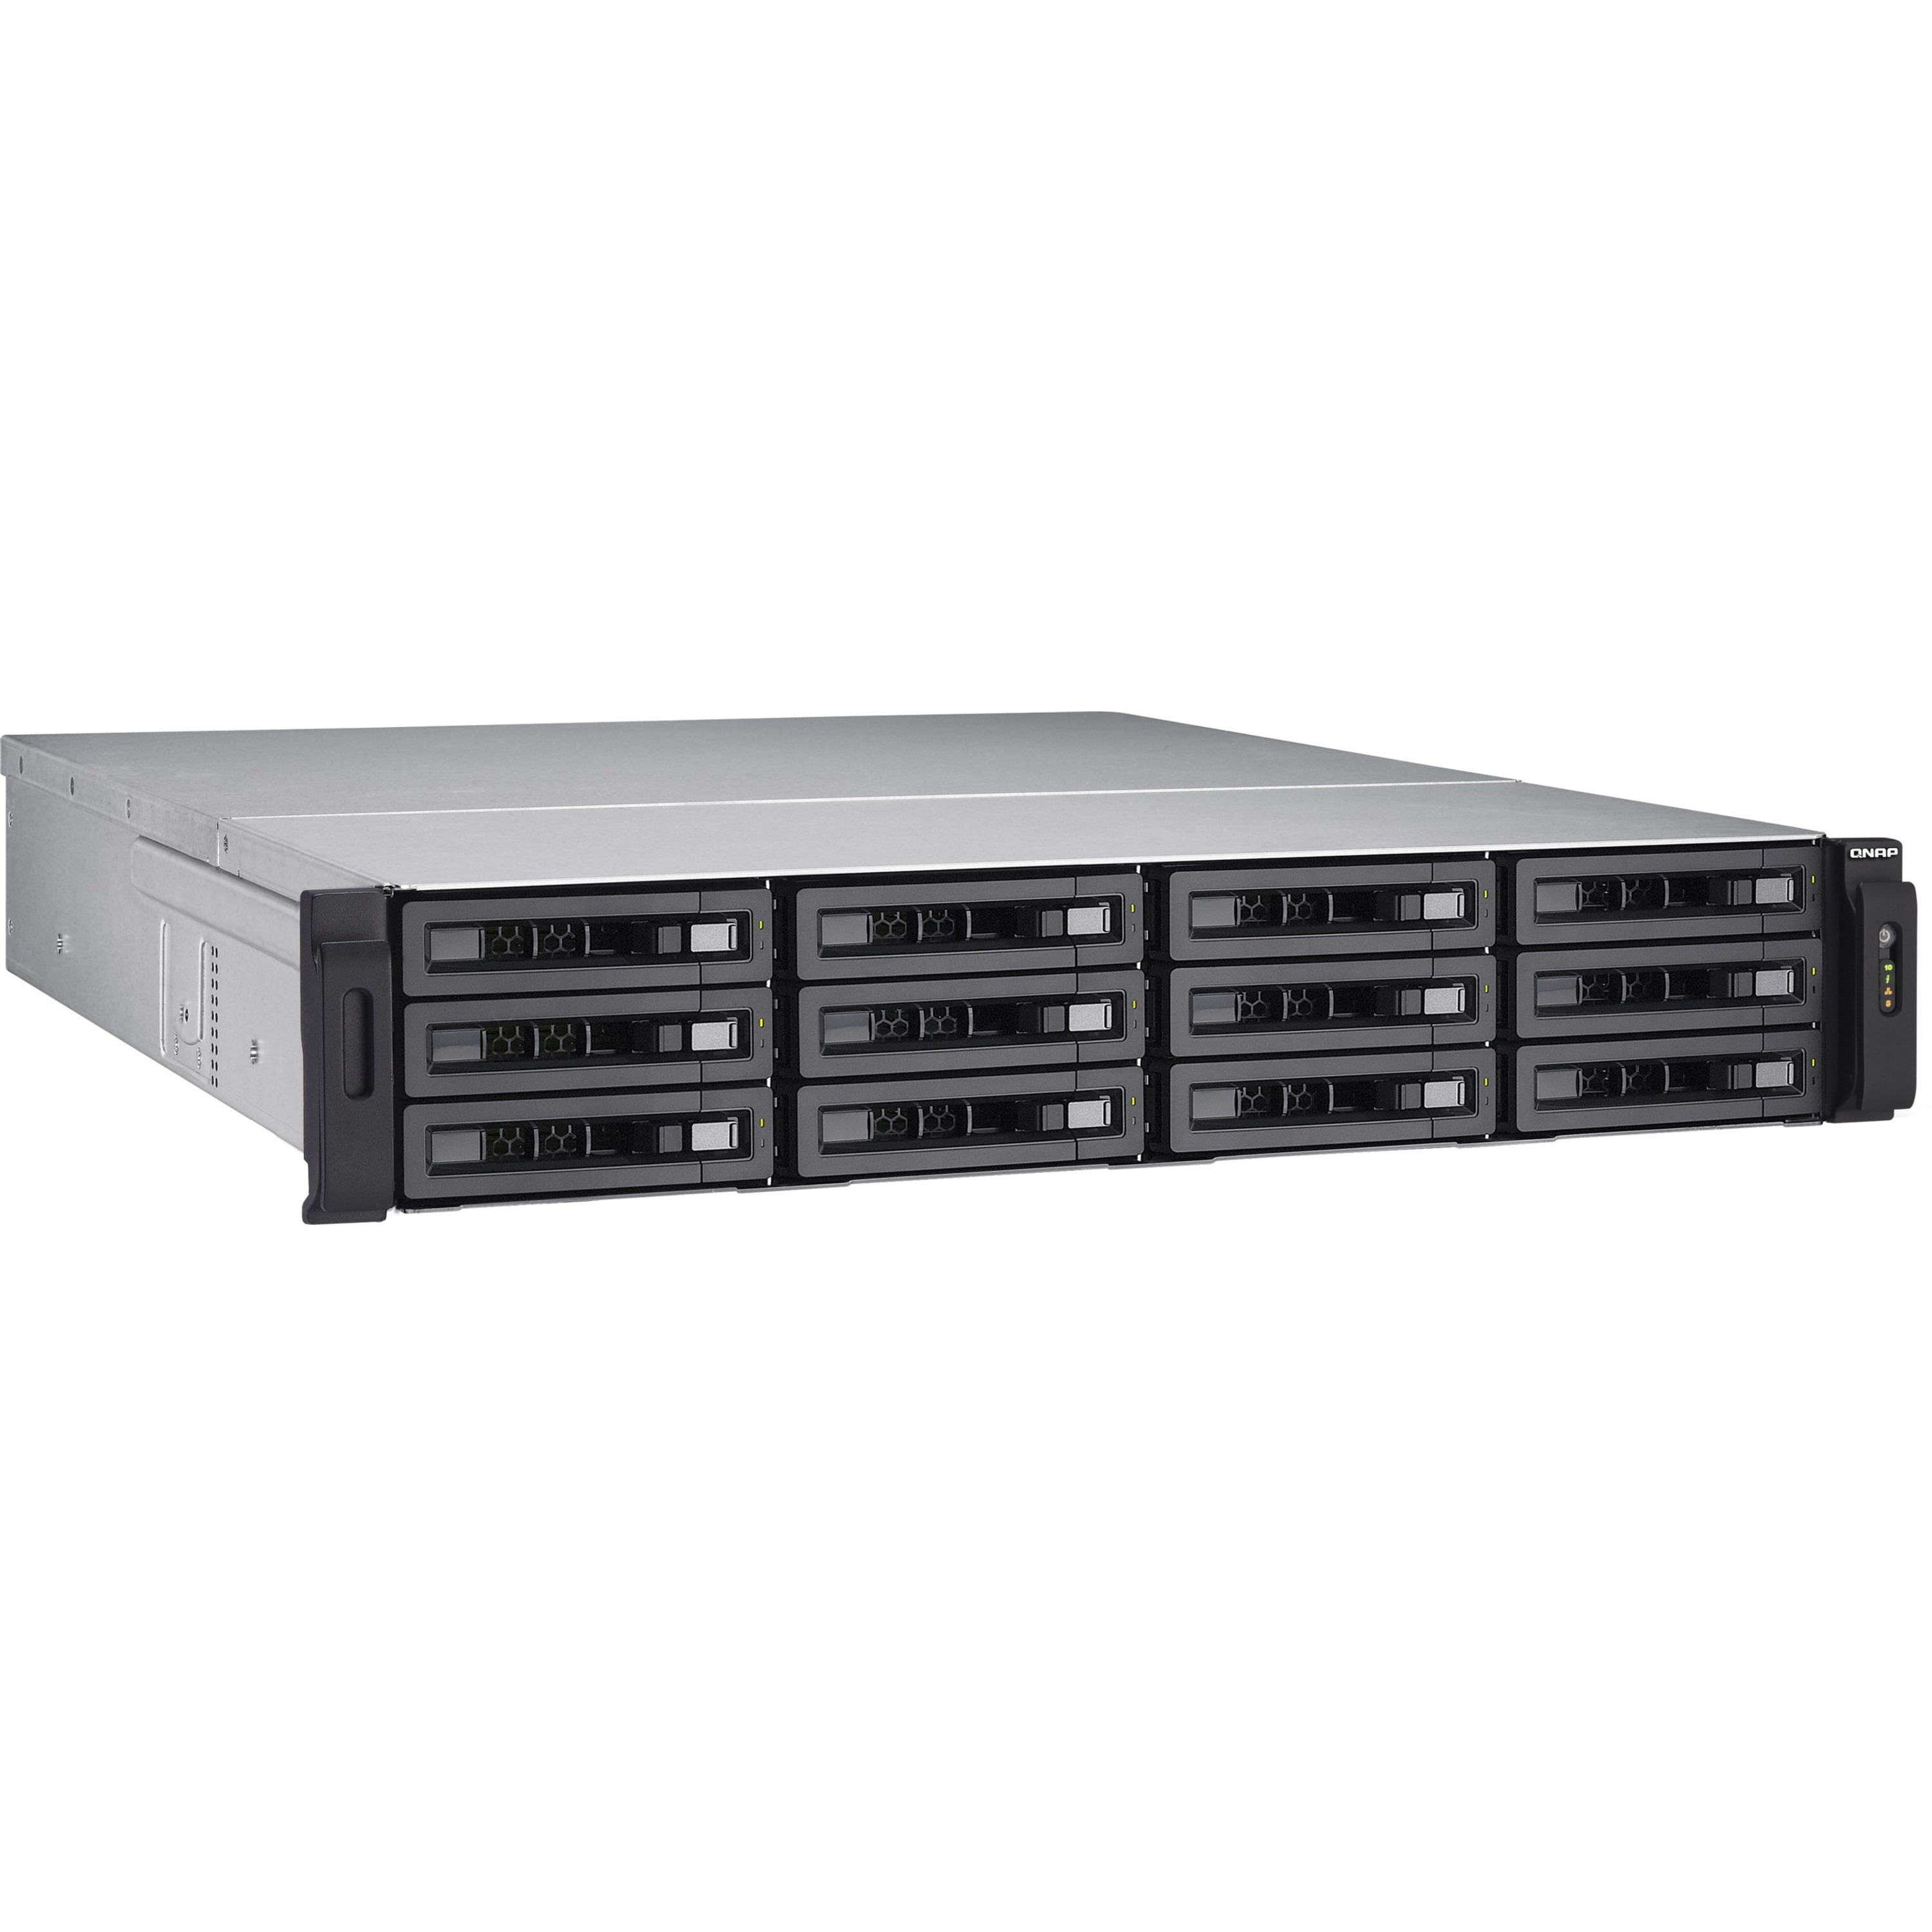 QNAP 12-bay 12Gbps SAS-enabled High-performance NAS/iSCSI/IP-SAN Unified Storage